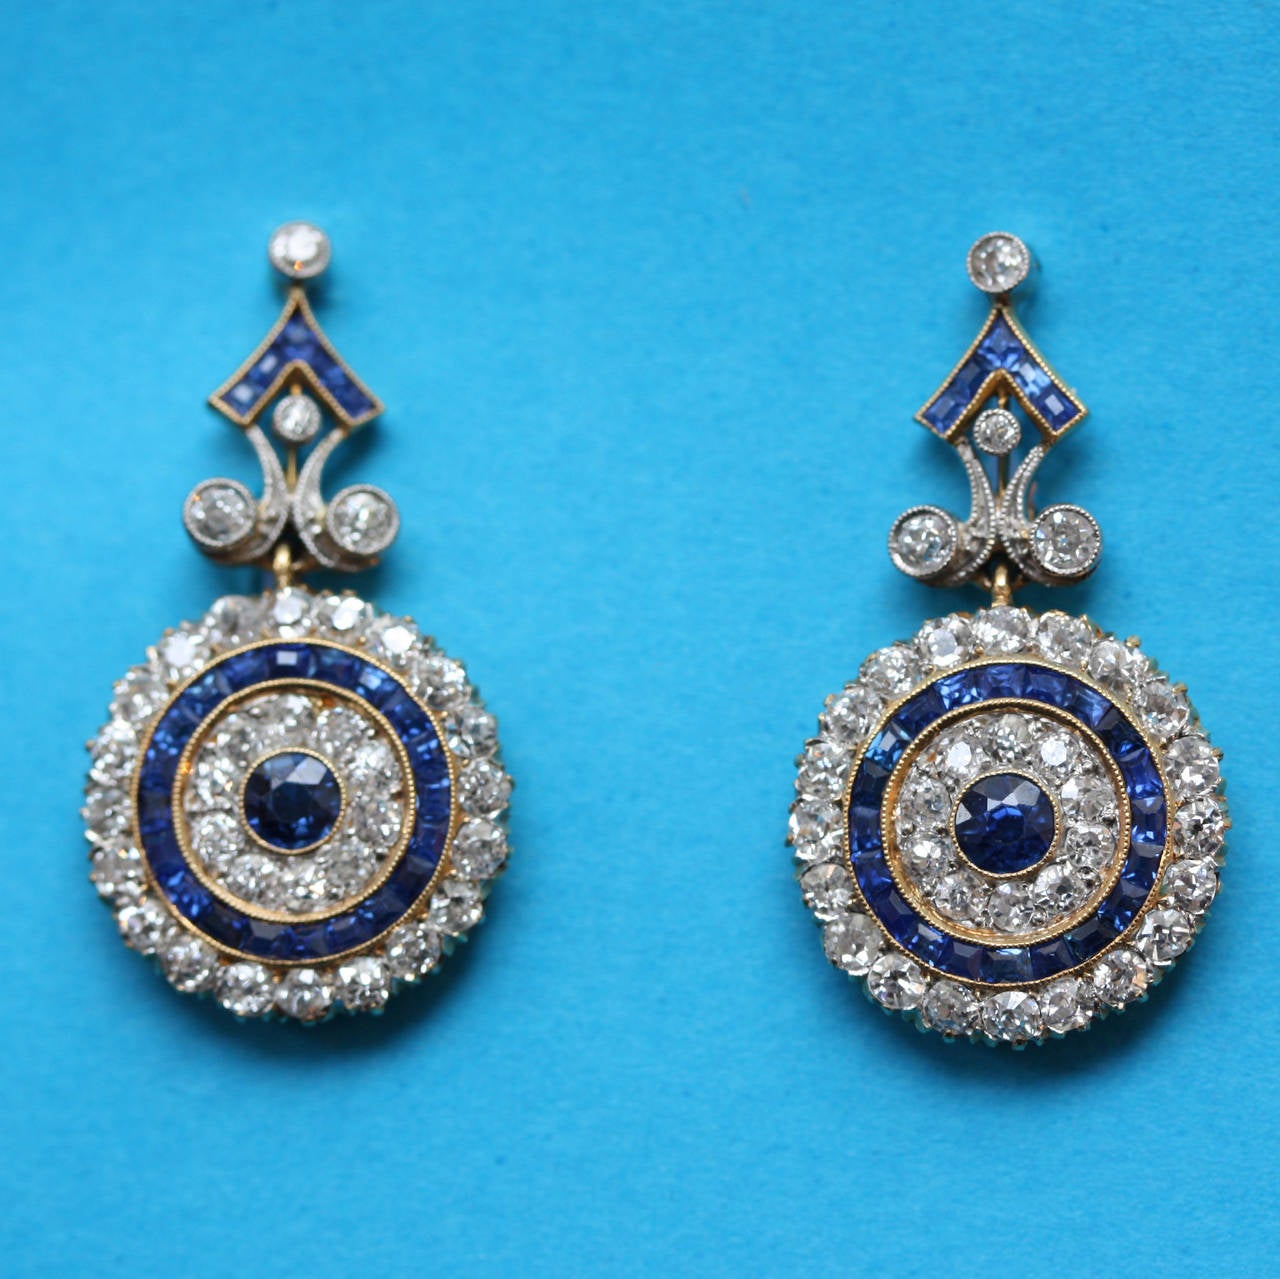 A pair of Edwardian target earrings in 18 carat yellow gold and platinum set with brilliant cut diamonds (circa 2.7 carats) and carré cut and pave set sapphire, numbered, circa 1910, England.

weight: 7.8 grams
dimensions: 3 x 1.7 cm.